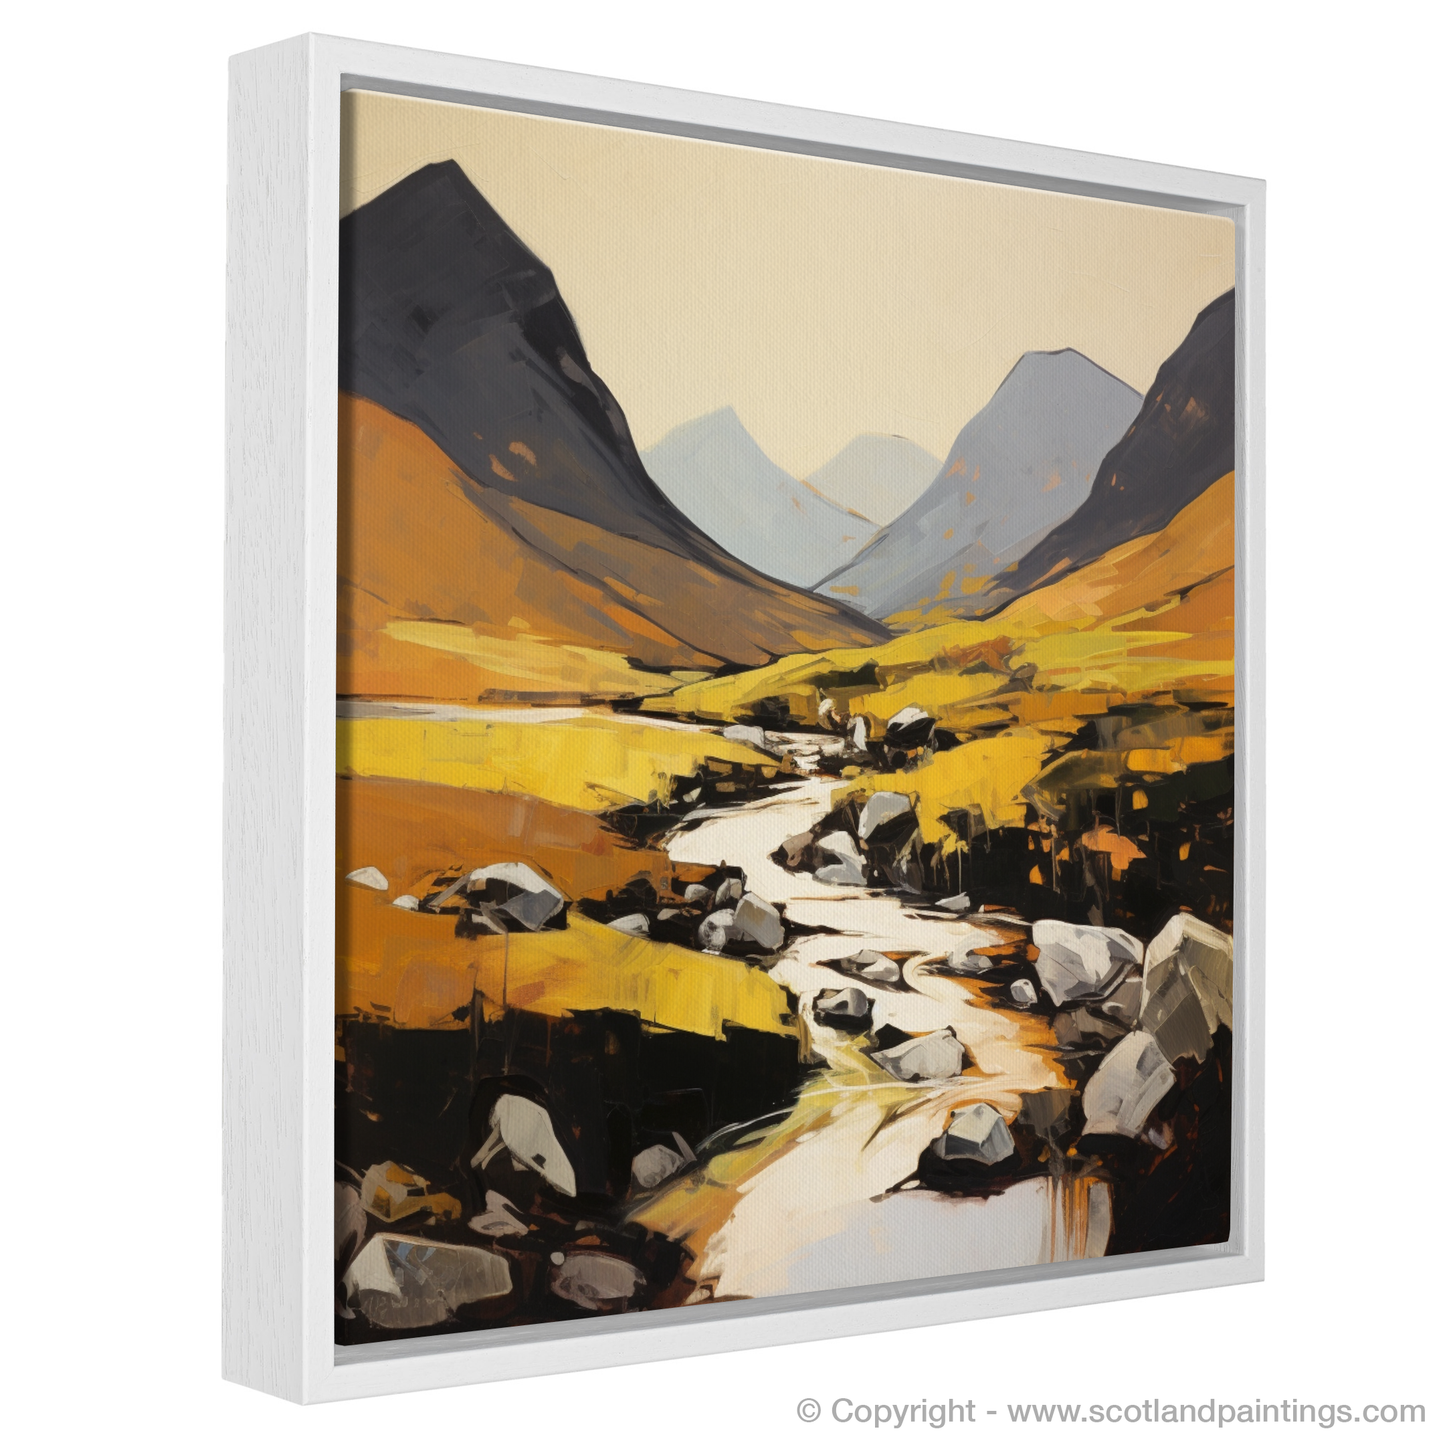 Painting and Art Print of Glen Rosa, Isle of Arran entitled "Glen Rosa Unveiled: An Expressionist Journey Through Scotland's Wild Beauty".